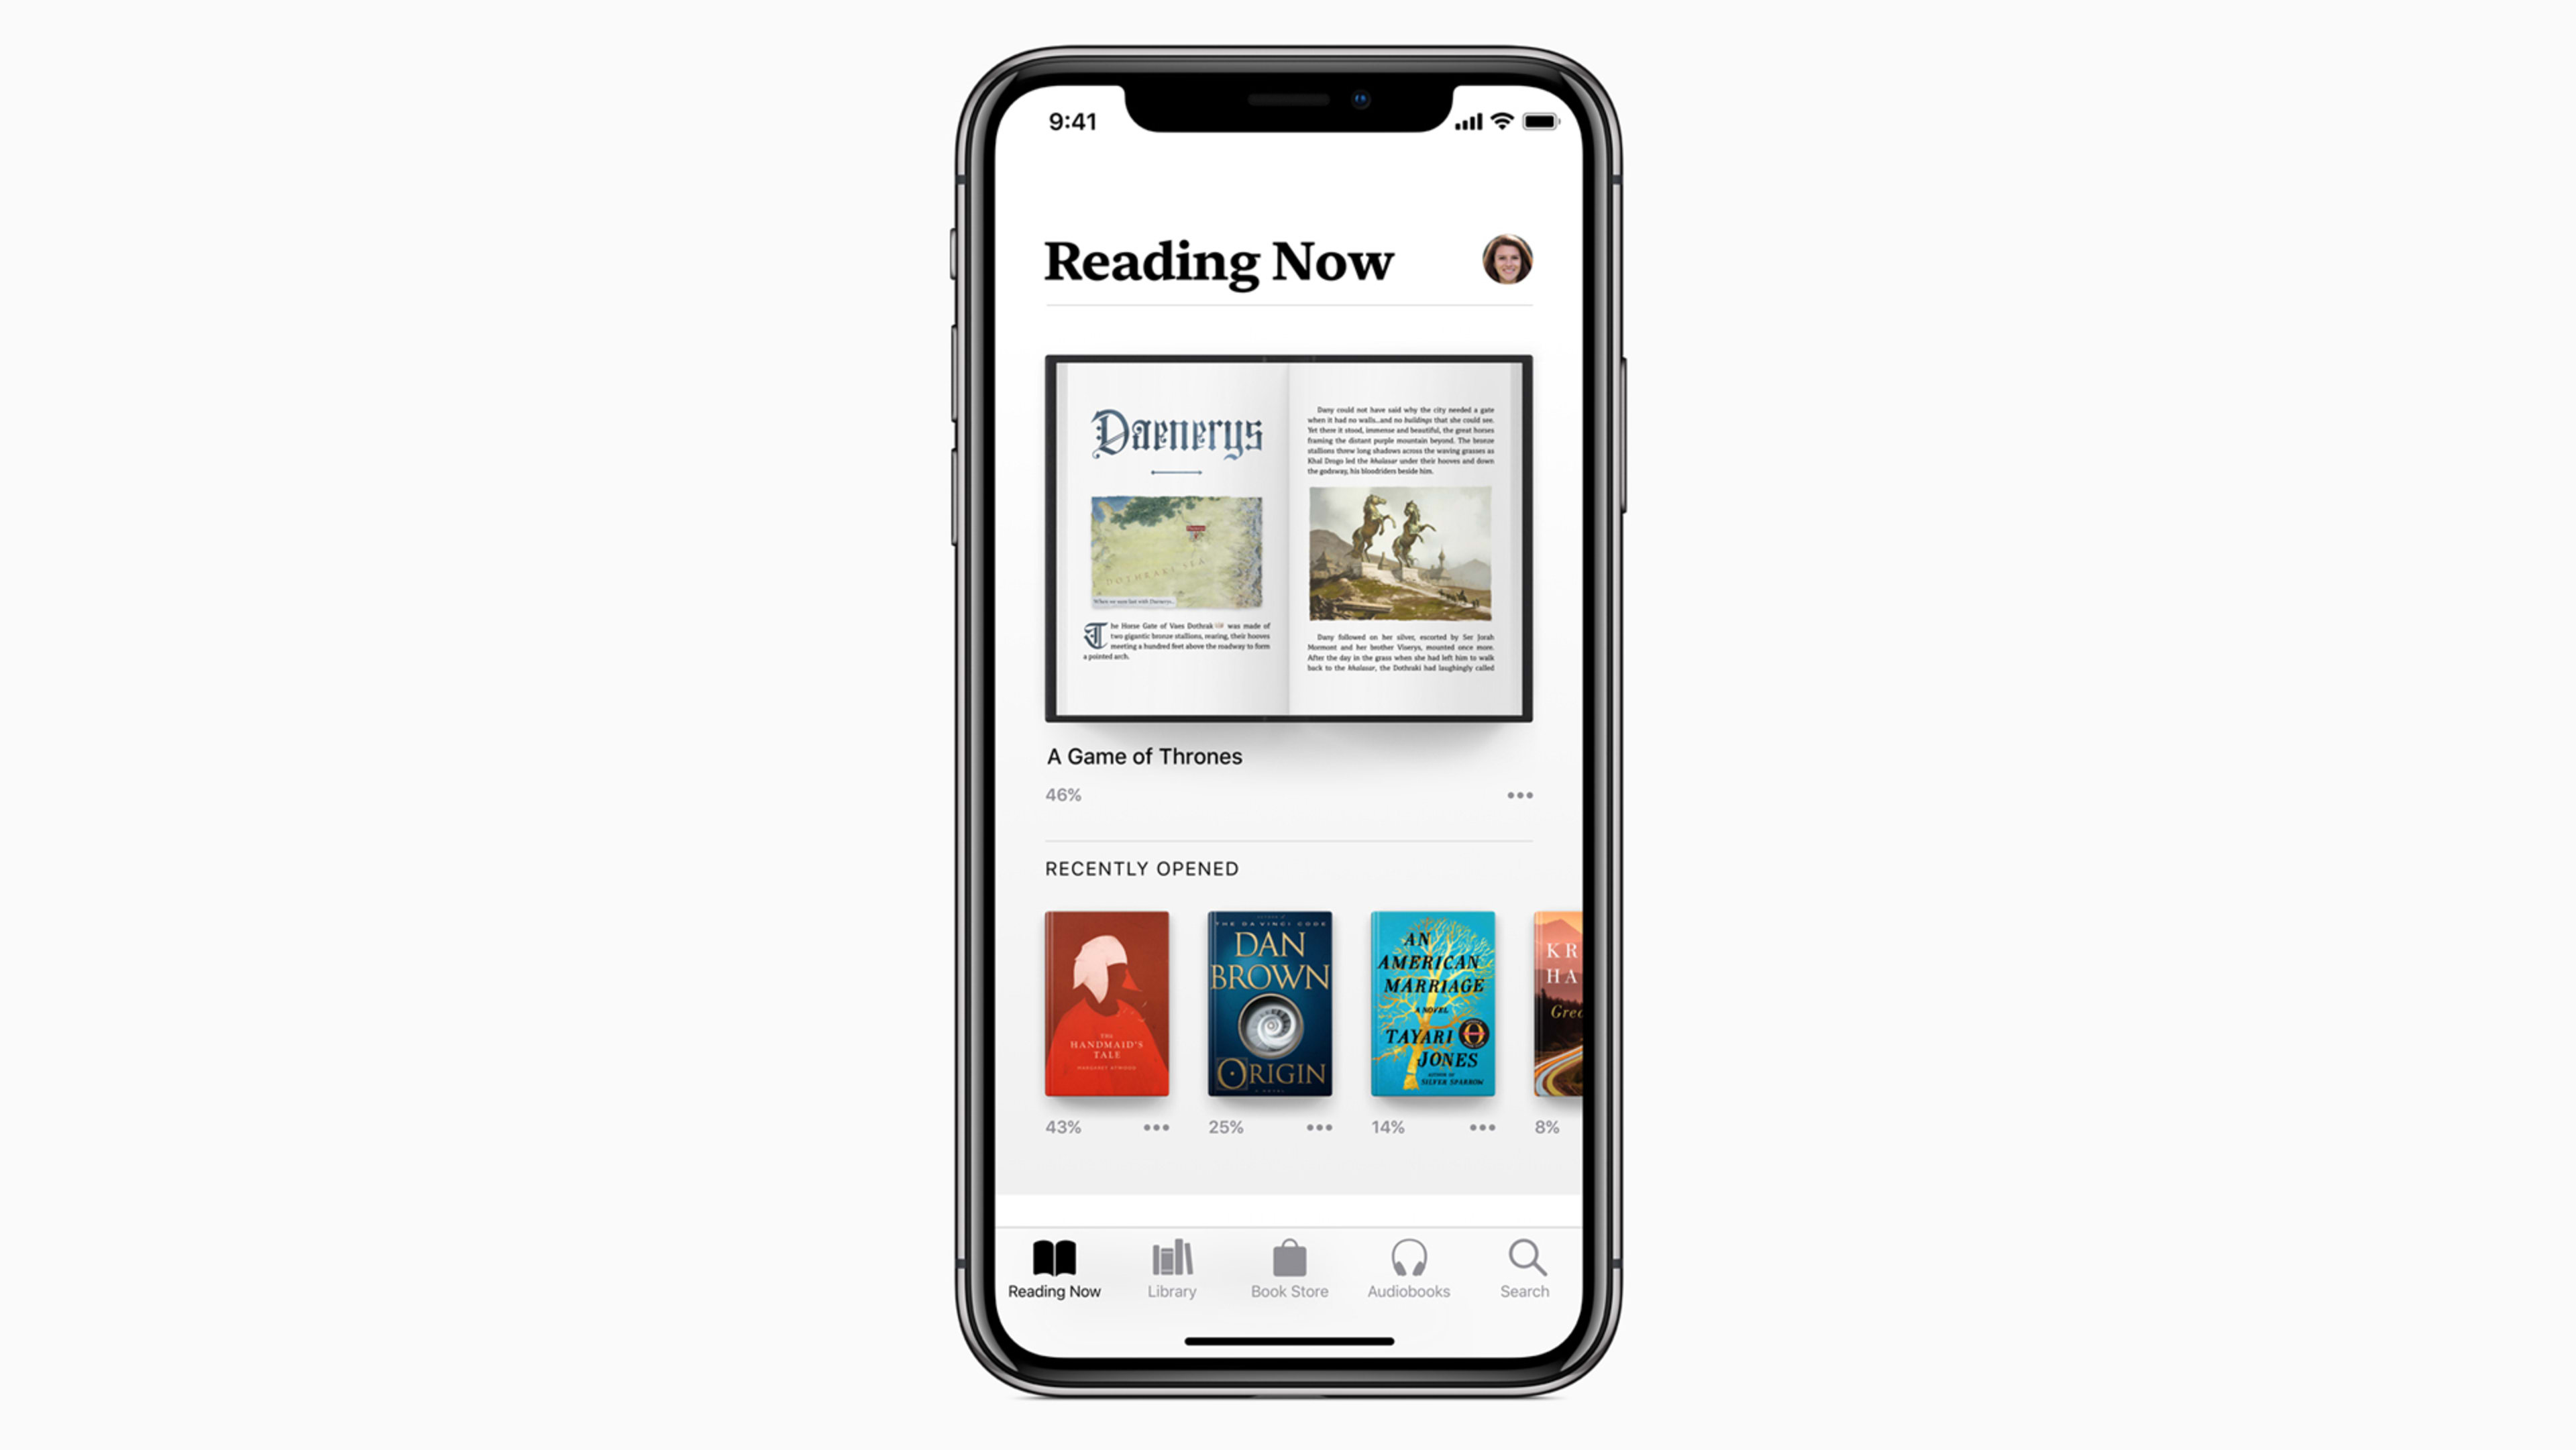 Apple Books is coming for Audible with its iOS 12 update